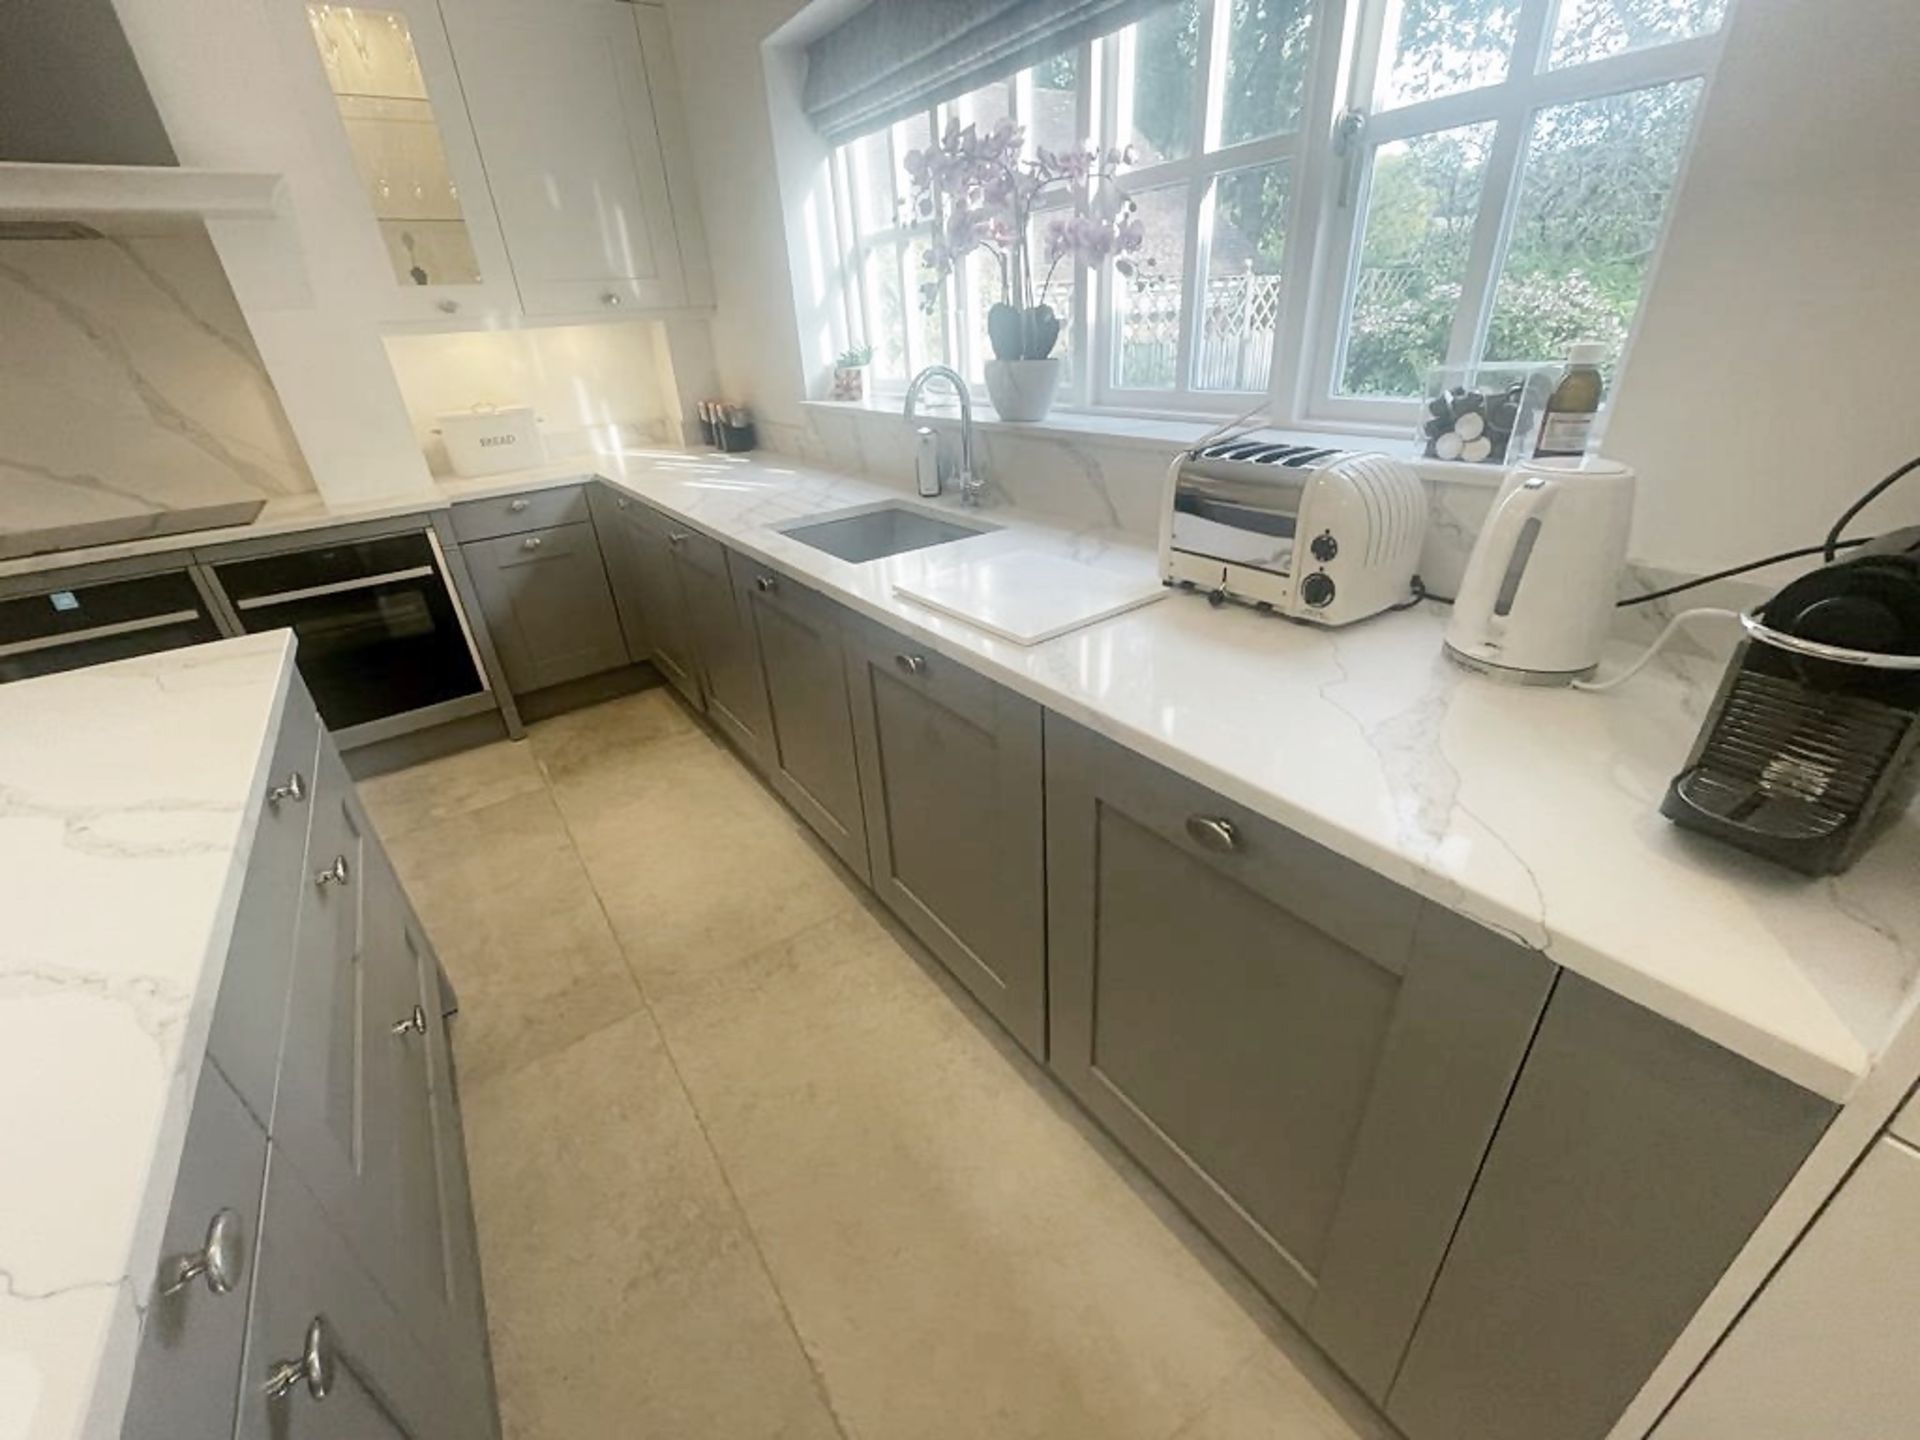 1 x SIEMATIC Bespoke Shaker-style Fitted Kitchen, Utility Room, Appliances & Modern Quartz Surfaces - Image 63 of 99